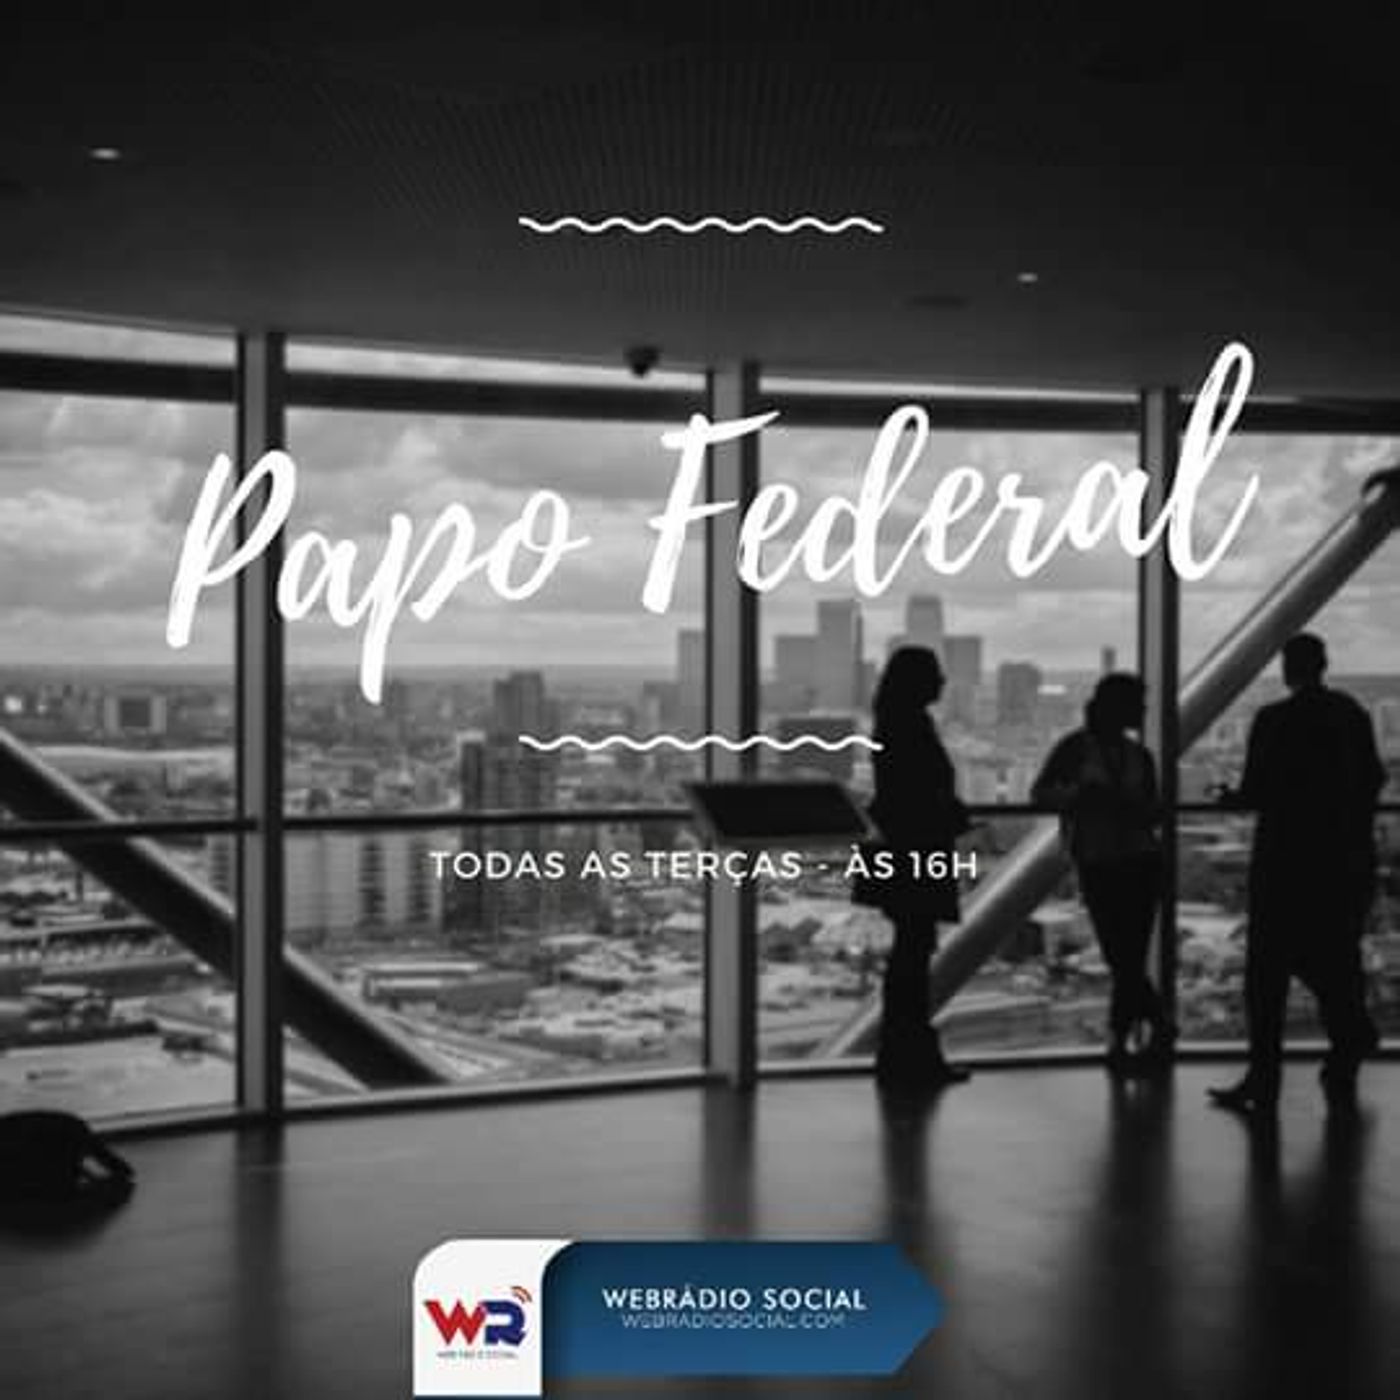 Papo Federal 17/04/2018